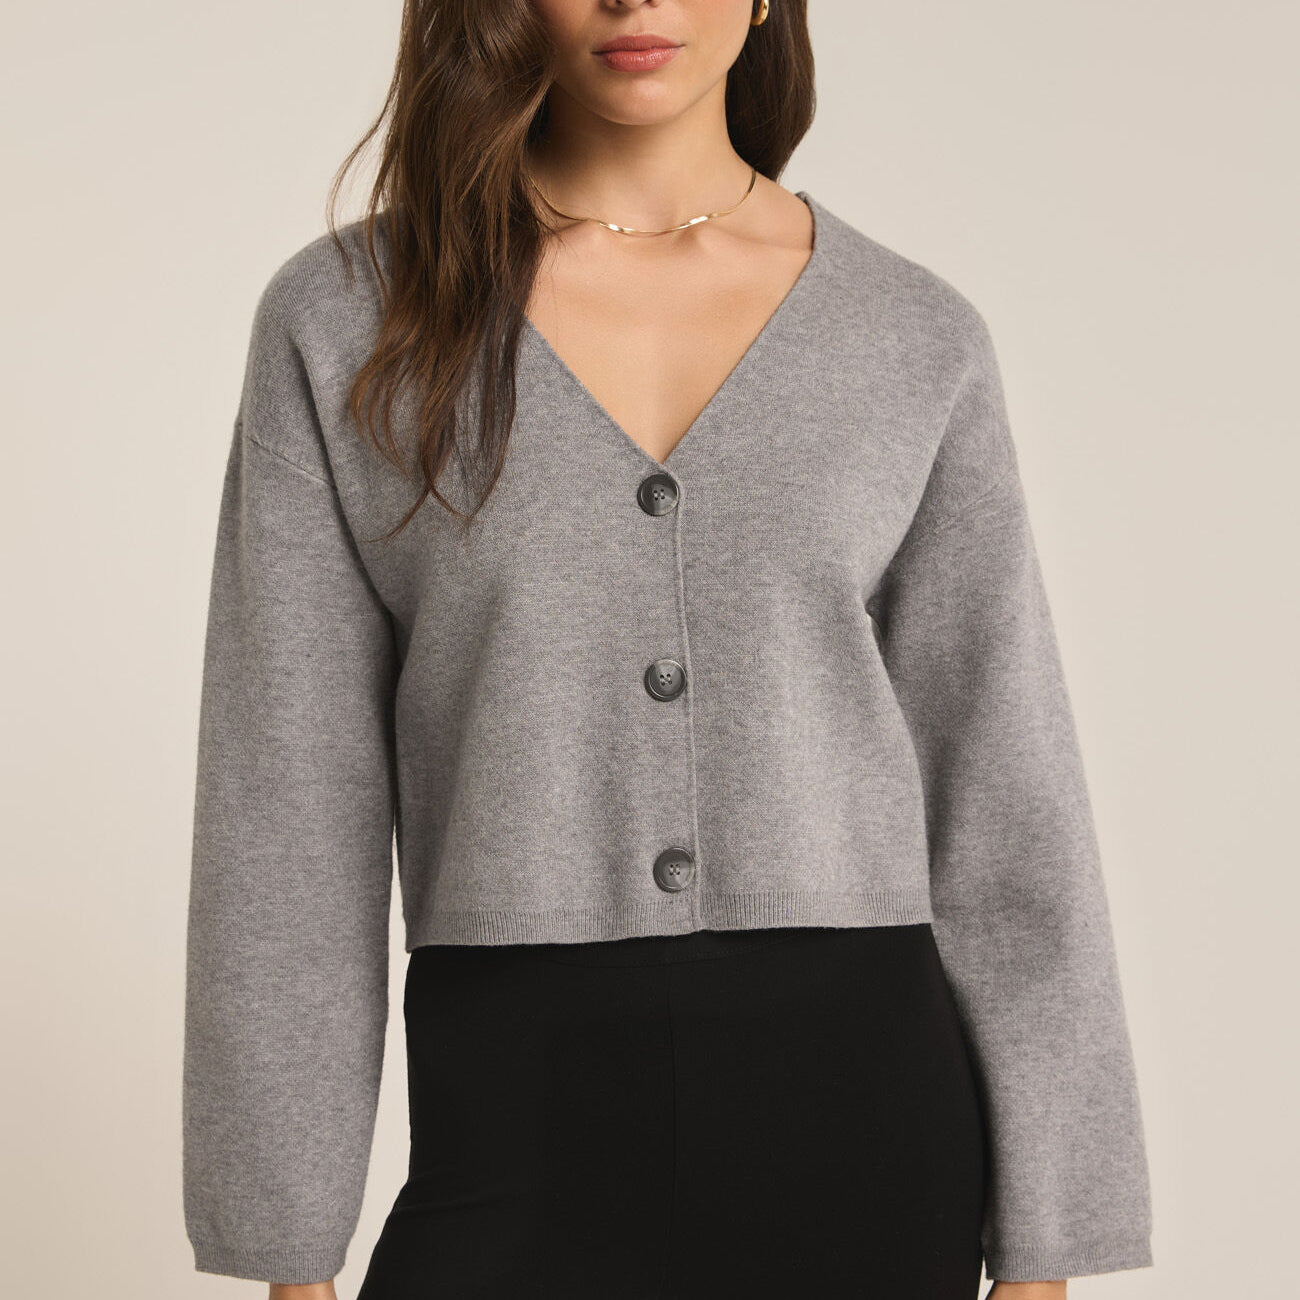 Estelle Cardigan-Cardigans-Vixen Collection, Day Spa and Women's Boutique Located in Seattle, Washington